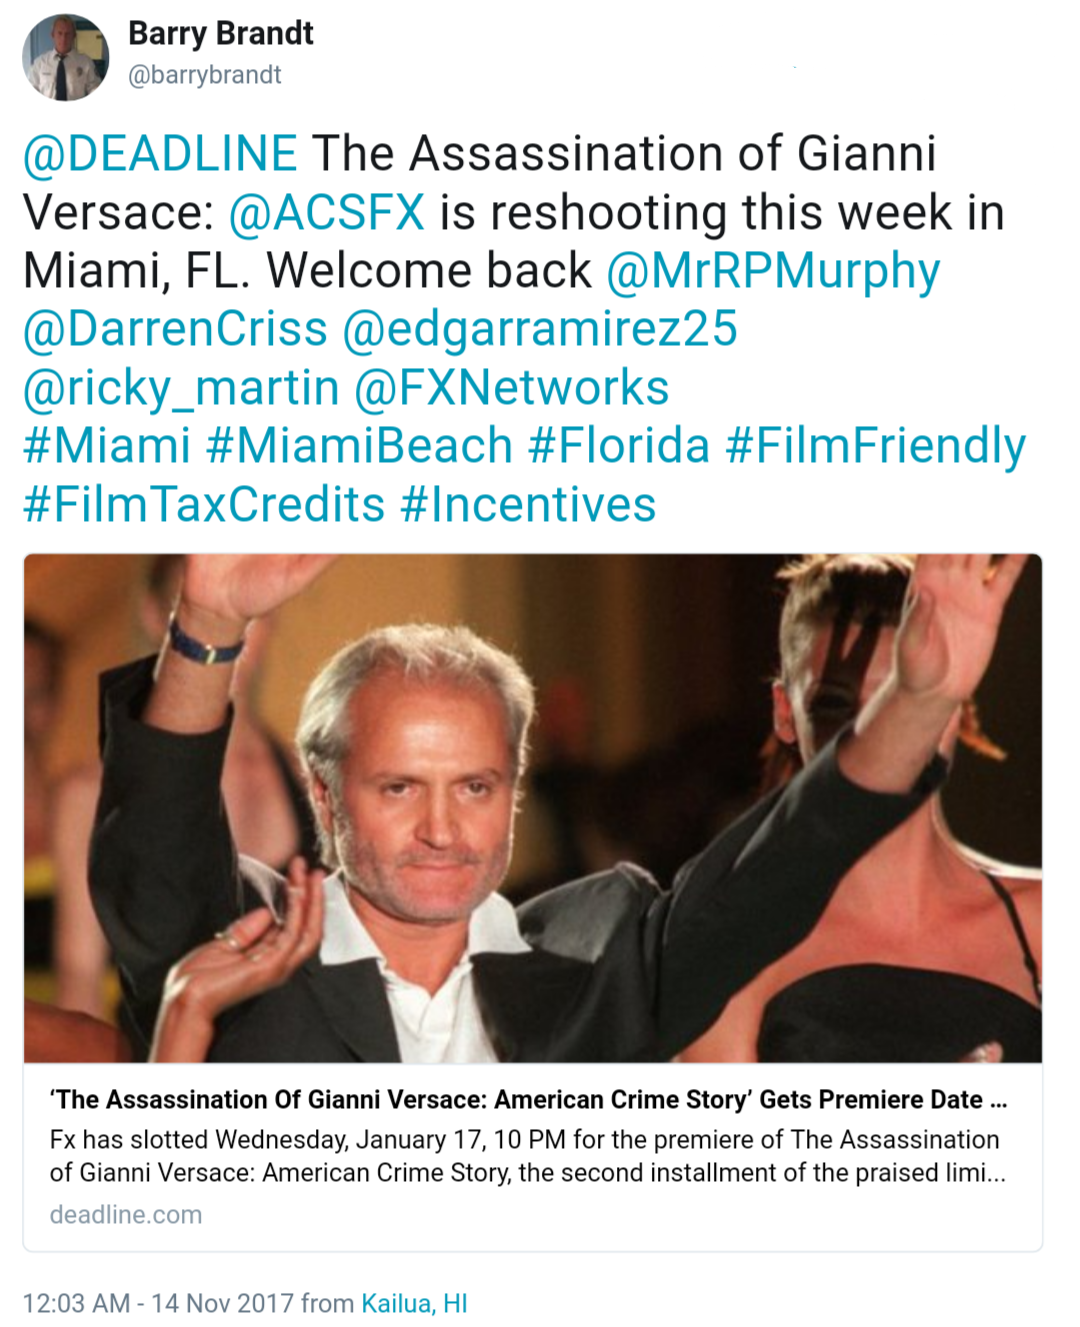 theassassinationofgianniversace - The Assassination of Gianni Versace:  American Crime Story - Page 9 Tumblr_ozfhr8HKHq1wpi2k2o1_1280